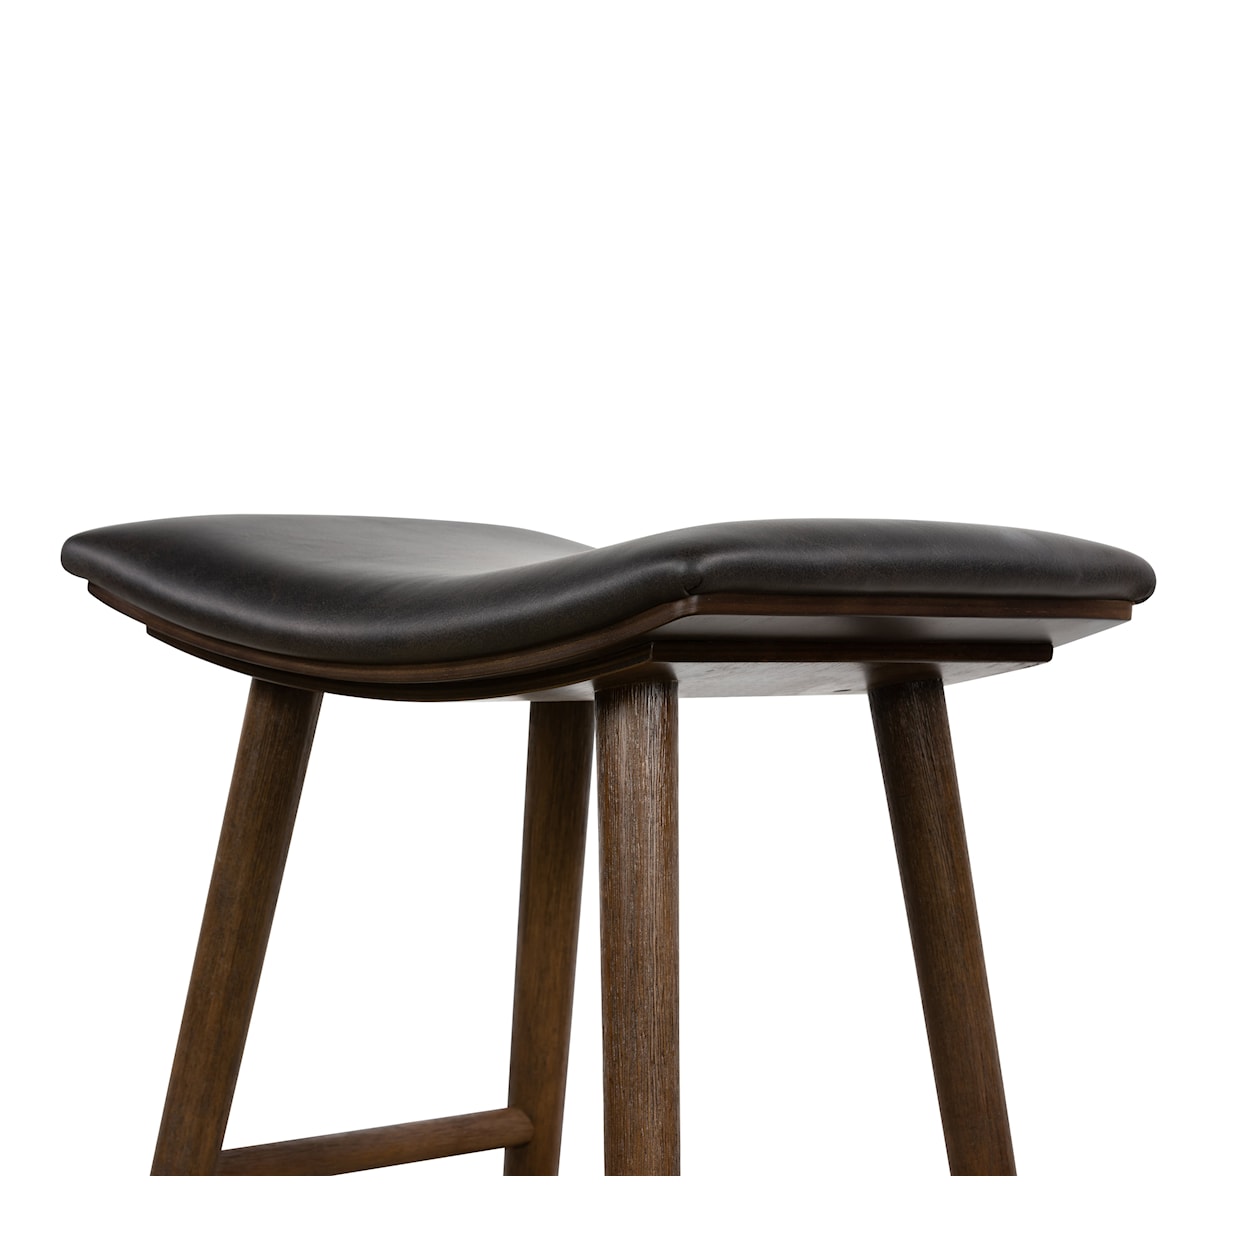 Four Hands Union Saddle Counter Stool